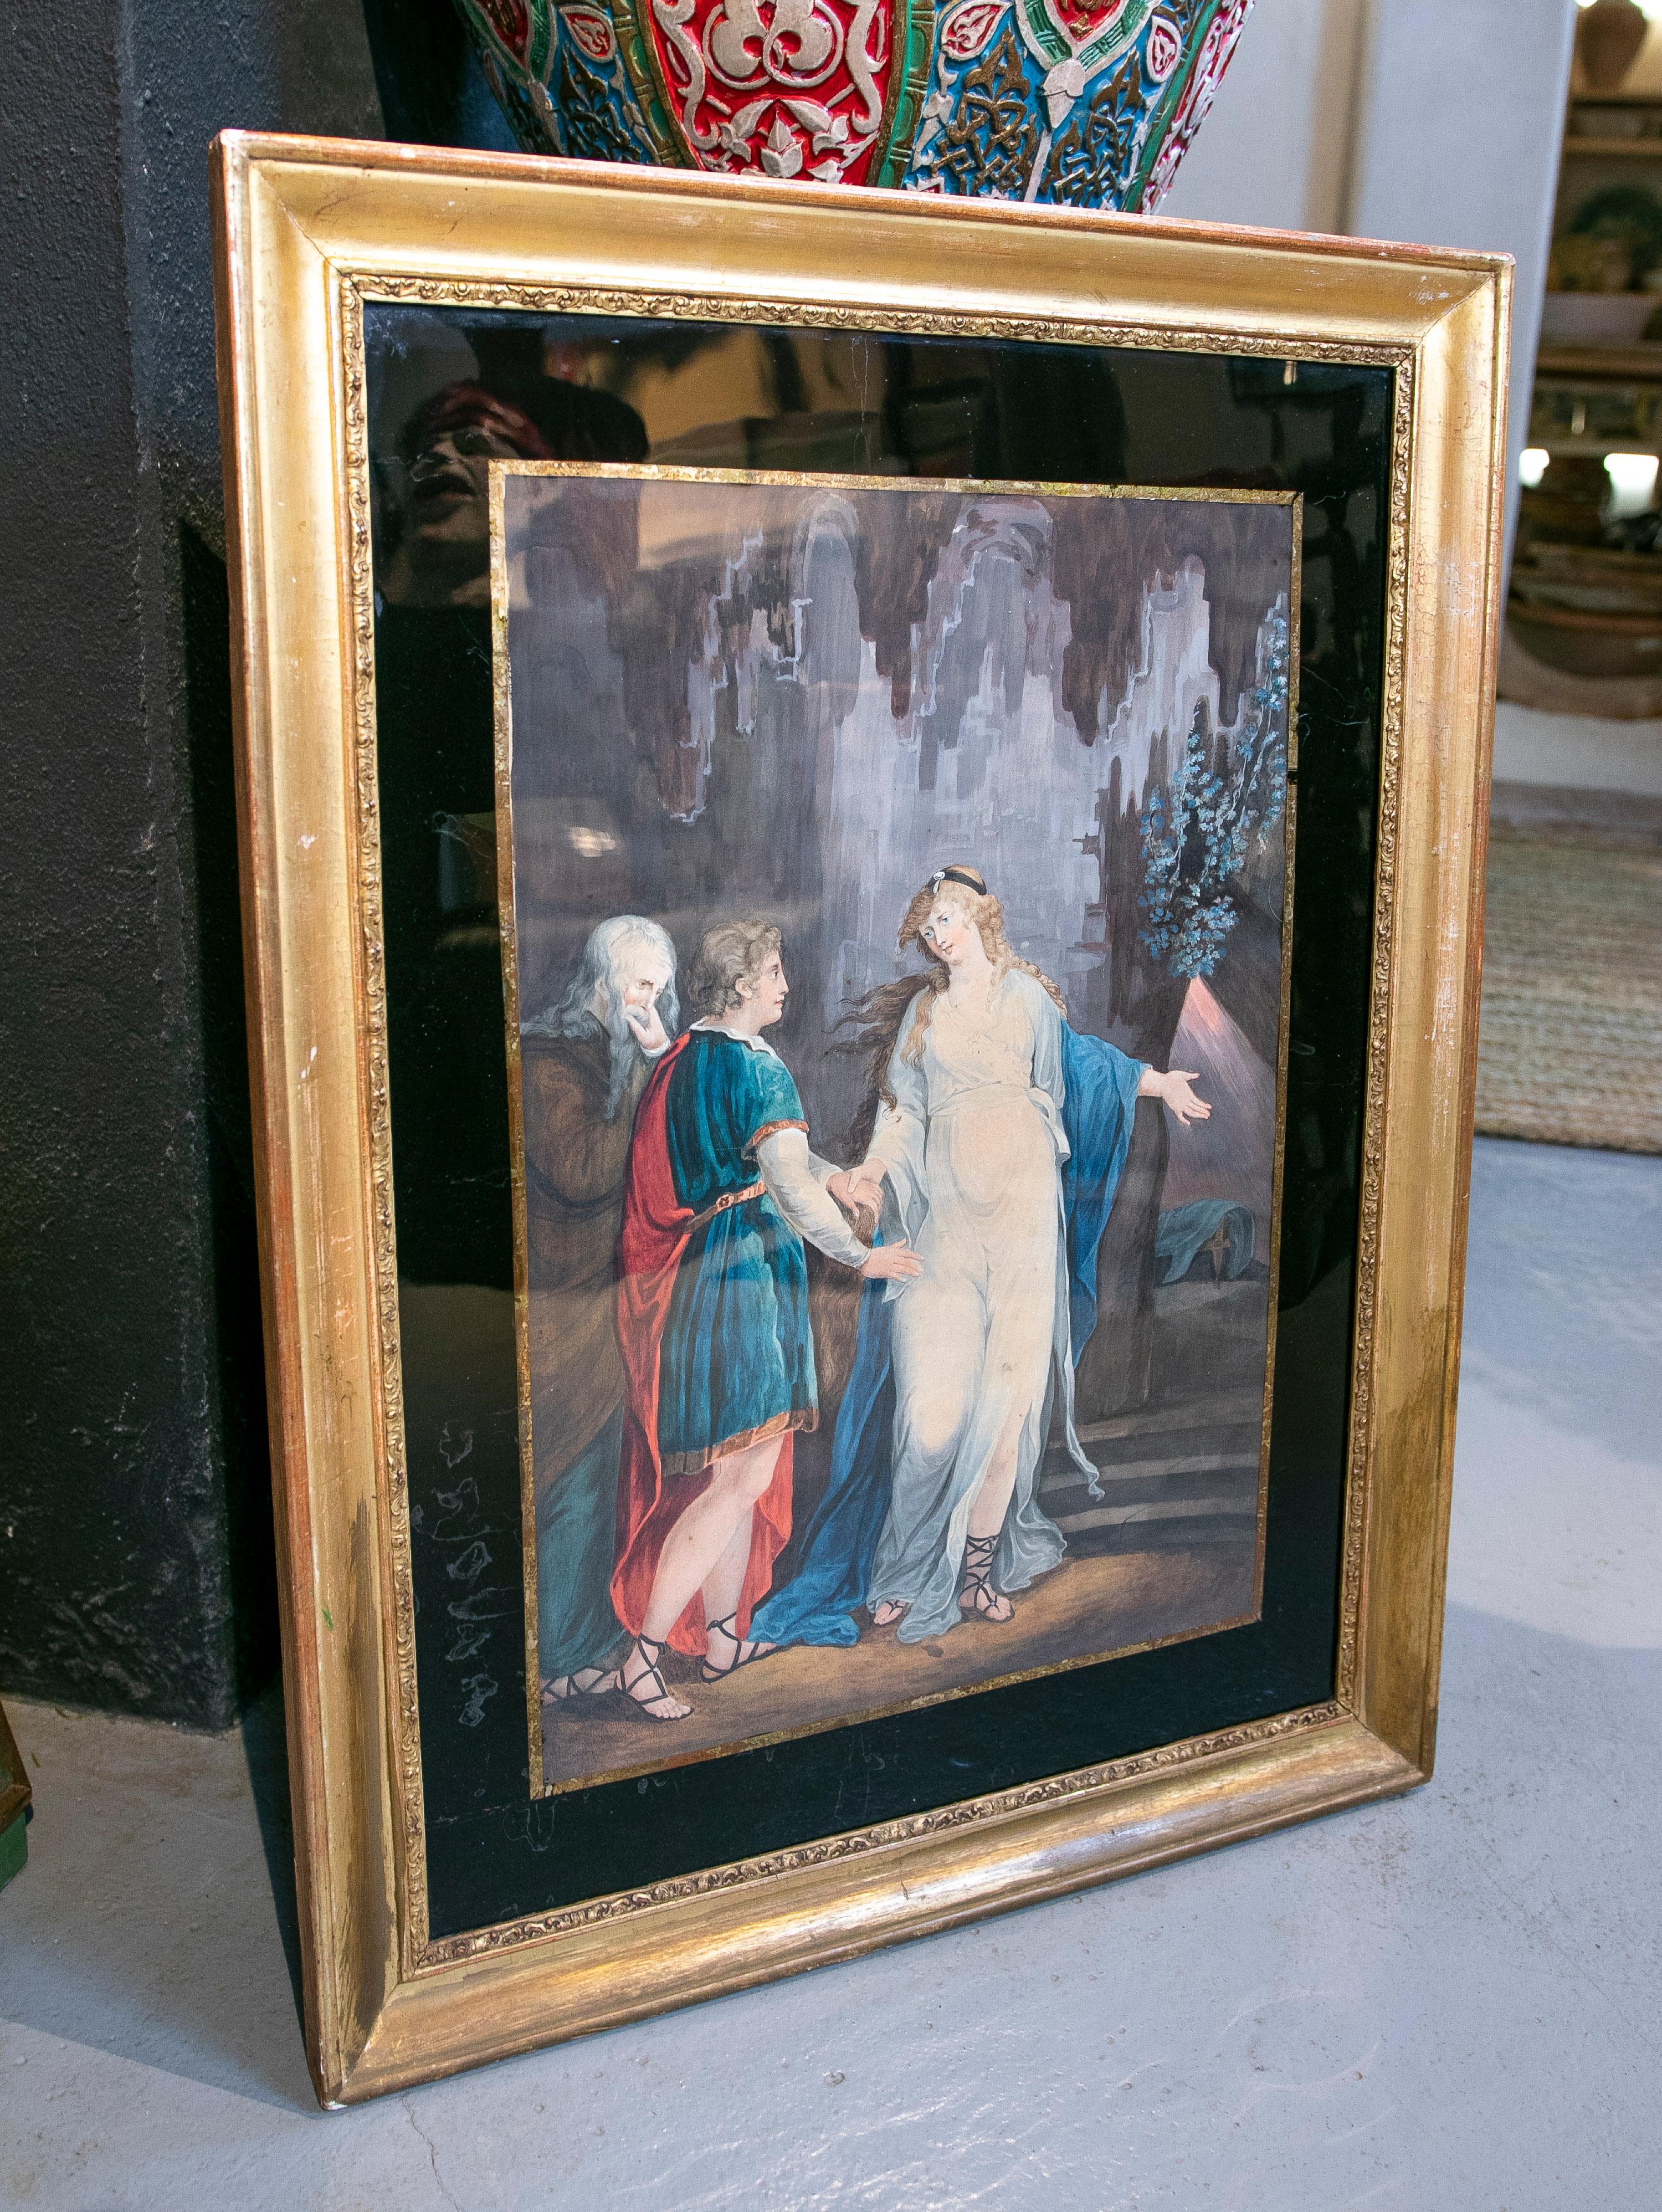 Neoclassical 1850 Spanish framed watercourse people painting showing two men consulting the Oracle at Delphi.

Interior dimensions: 55x37cm.